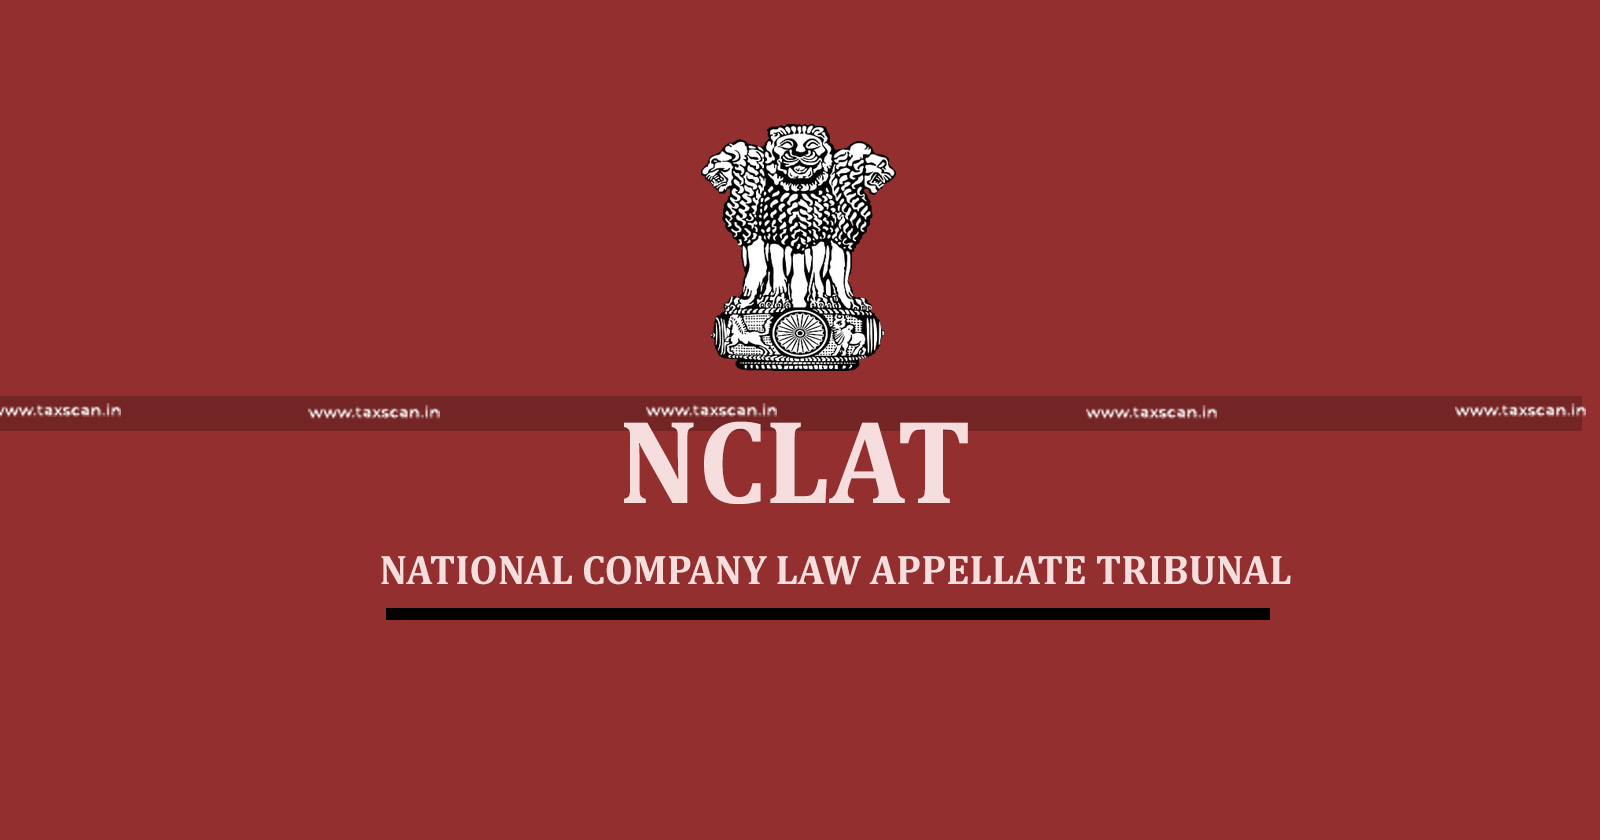 NCLAT - Validity of RP - Resolution plan - NCLAT validity - TAXSCAN